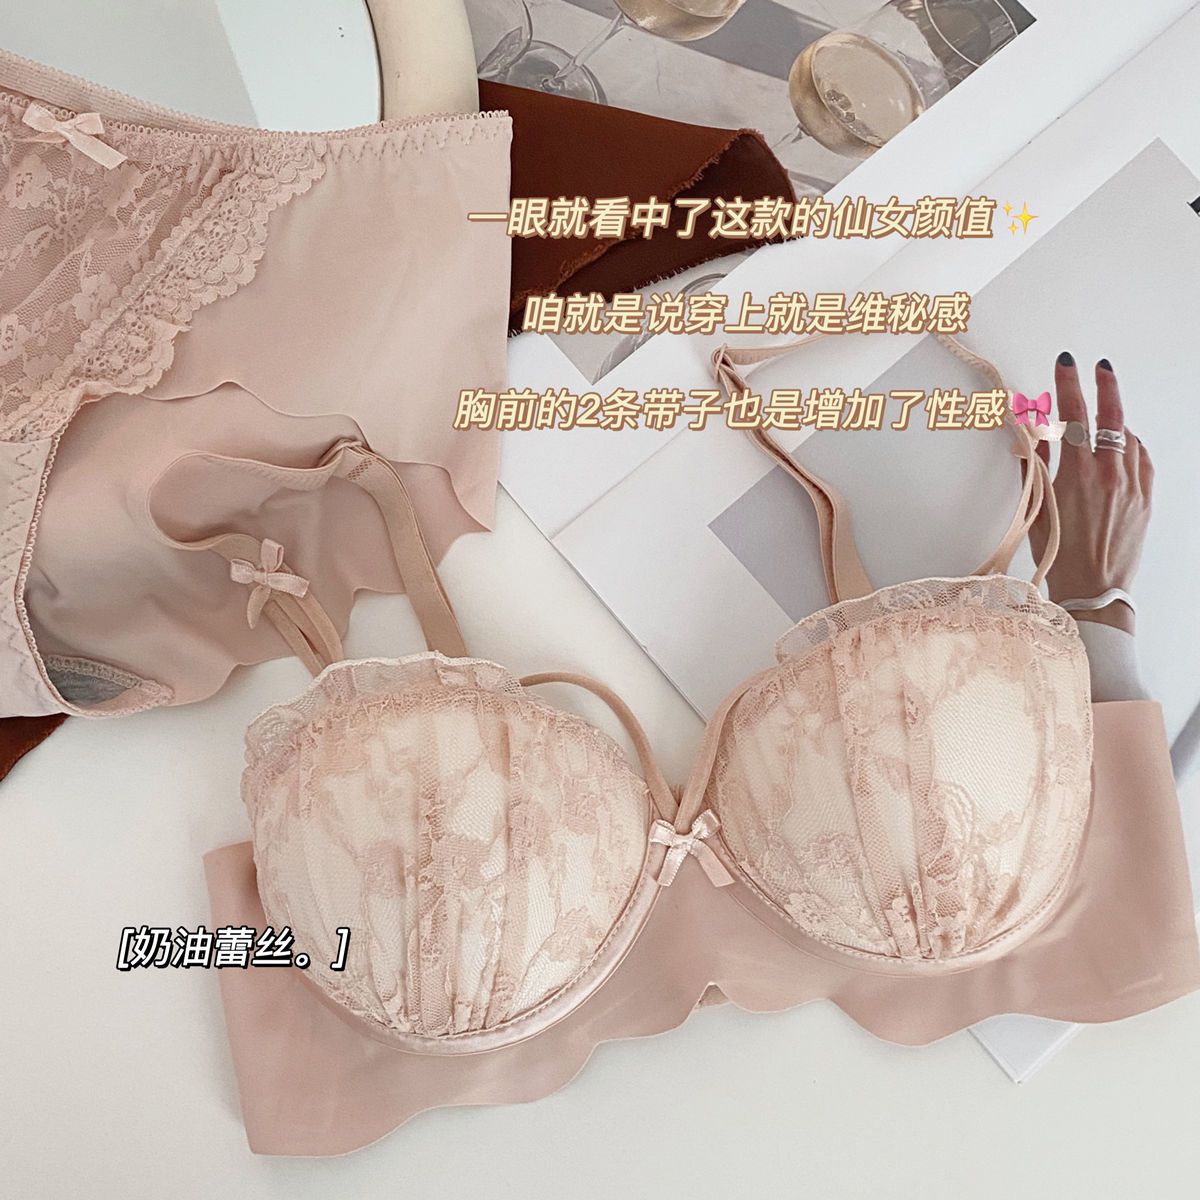 Japanese small chest gathered no steel ring underwear women's anti-sagging pure desire style  new hot style sexy suit